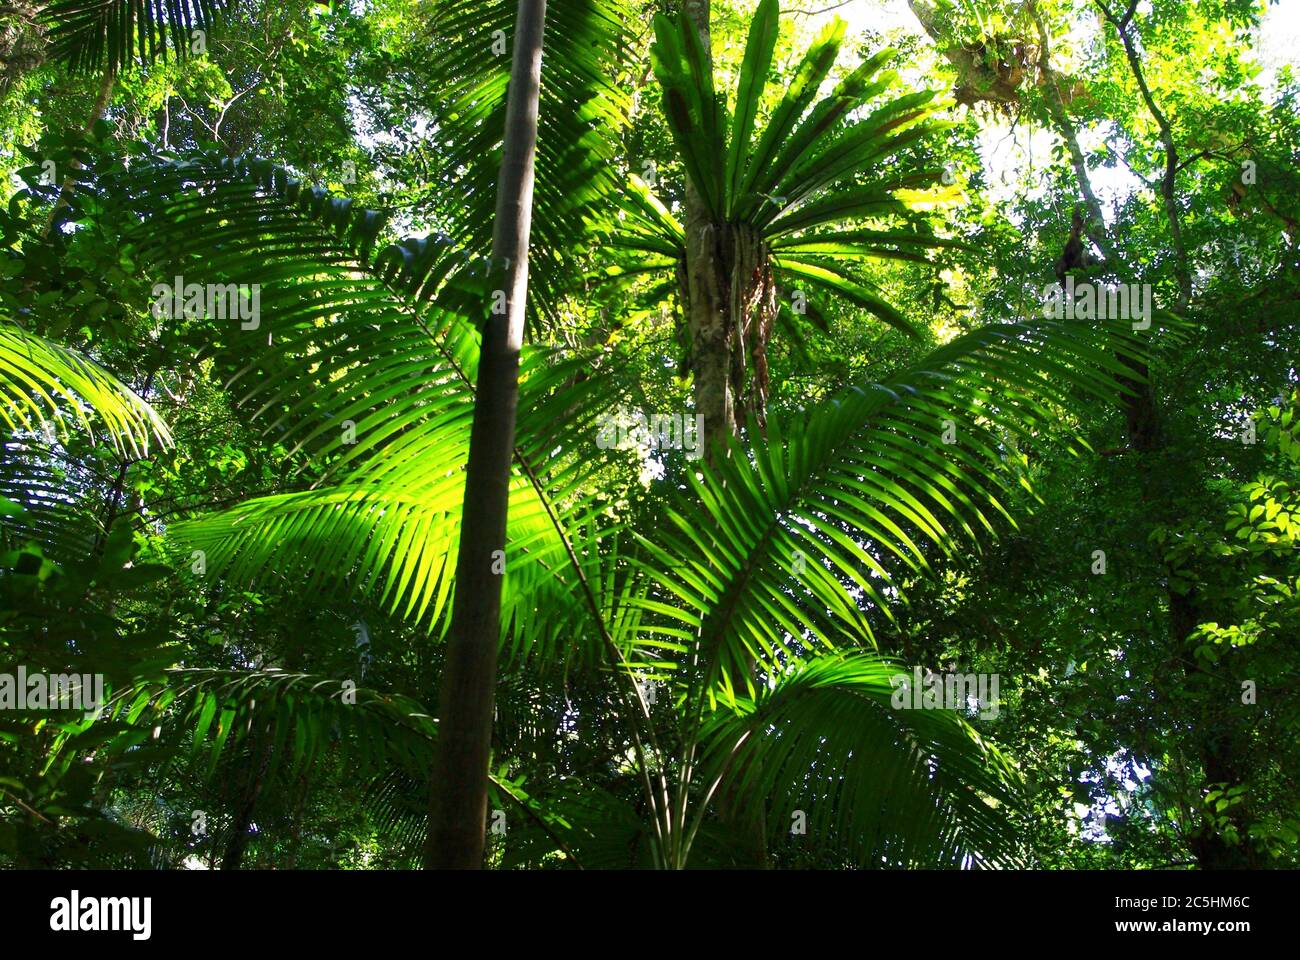 Sunlight Filtering through Rainforest Canopy at Mary Cairncross Scenic Reserve Maleny Queensland Australia Stock Photo